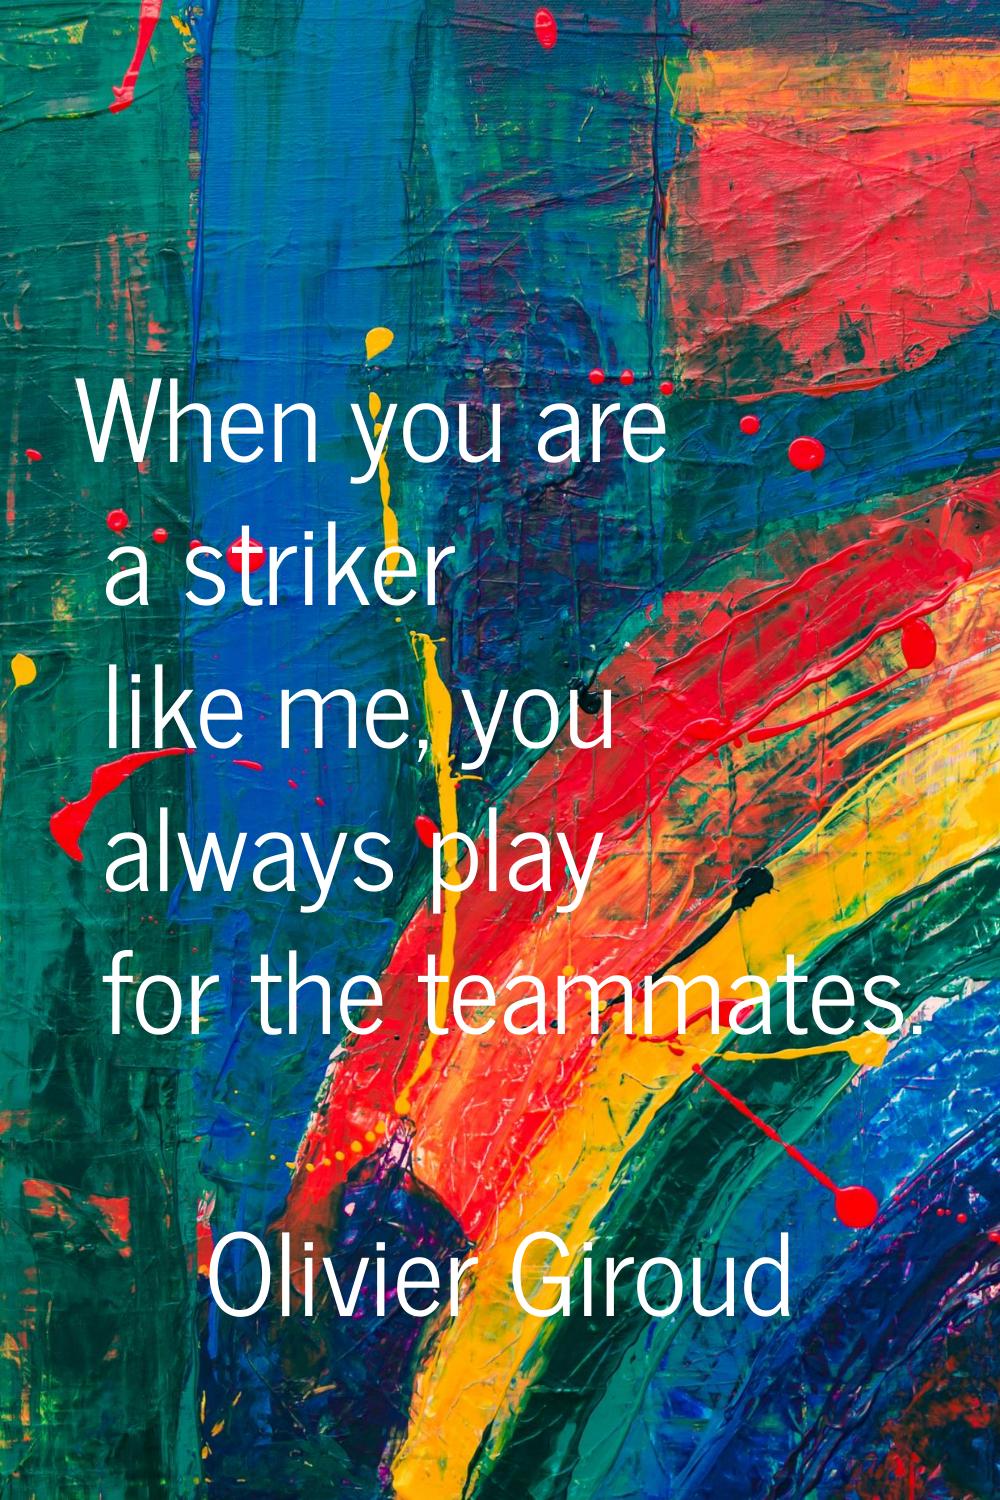 When you are a striker like me, you always play for the teammates.